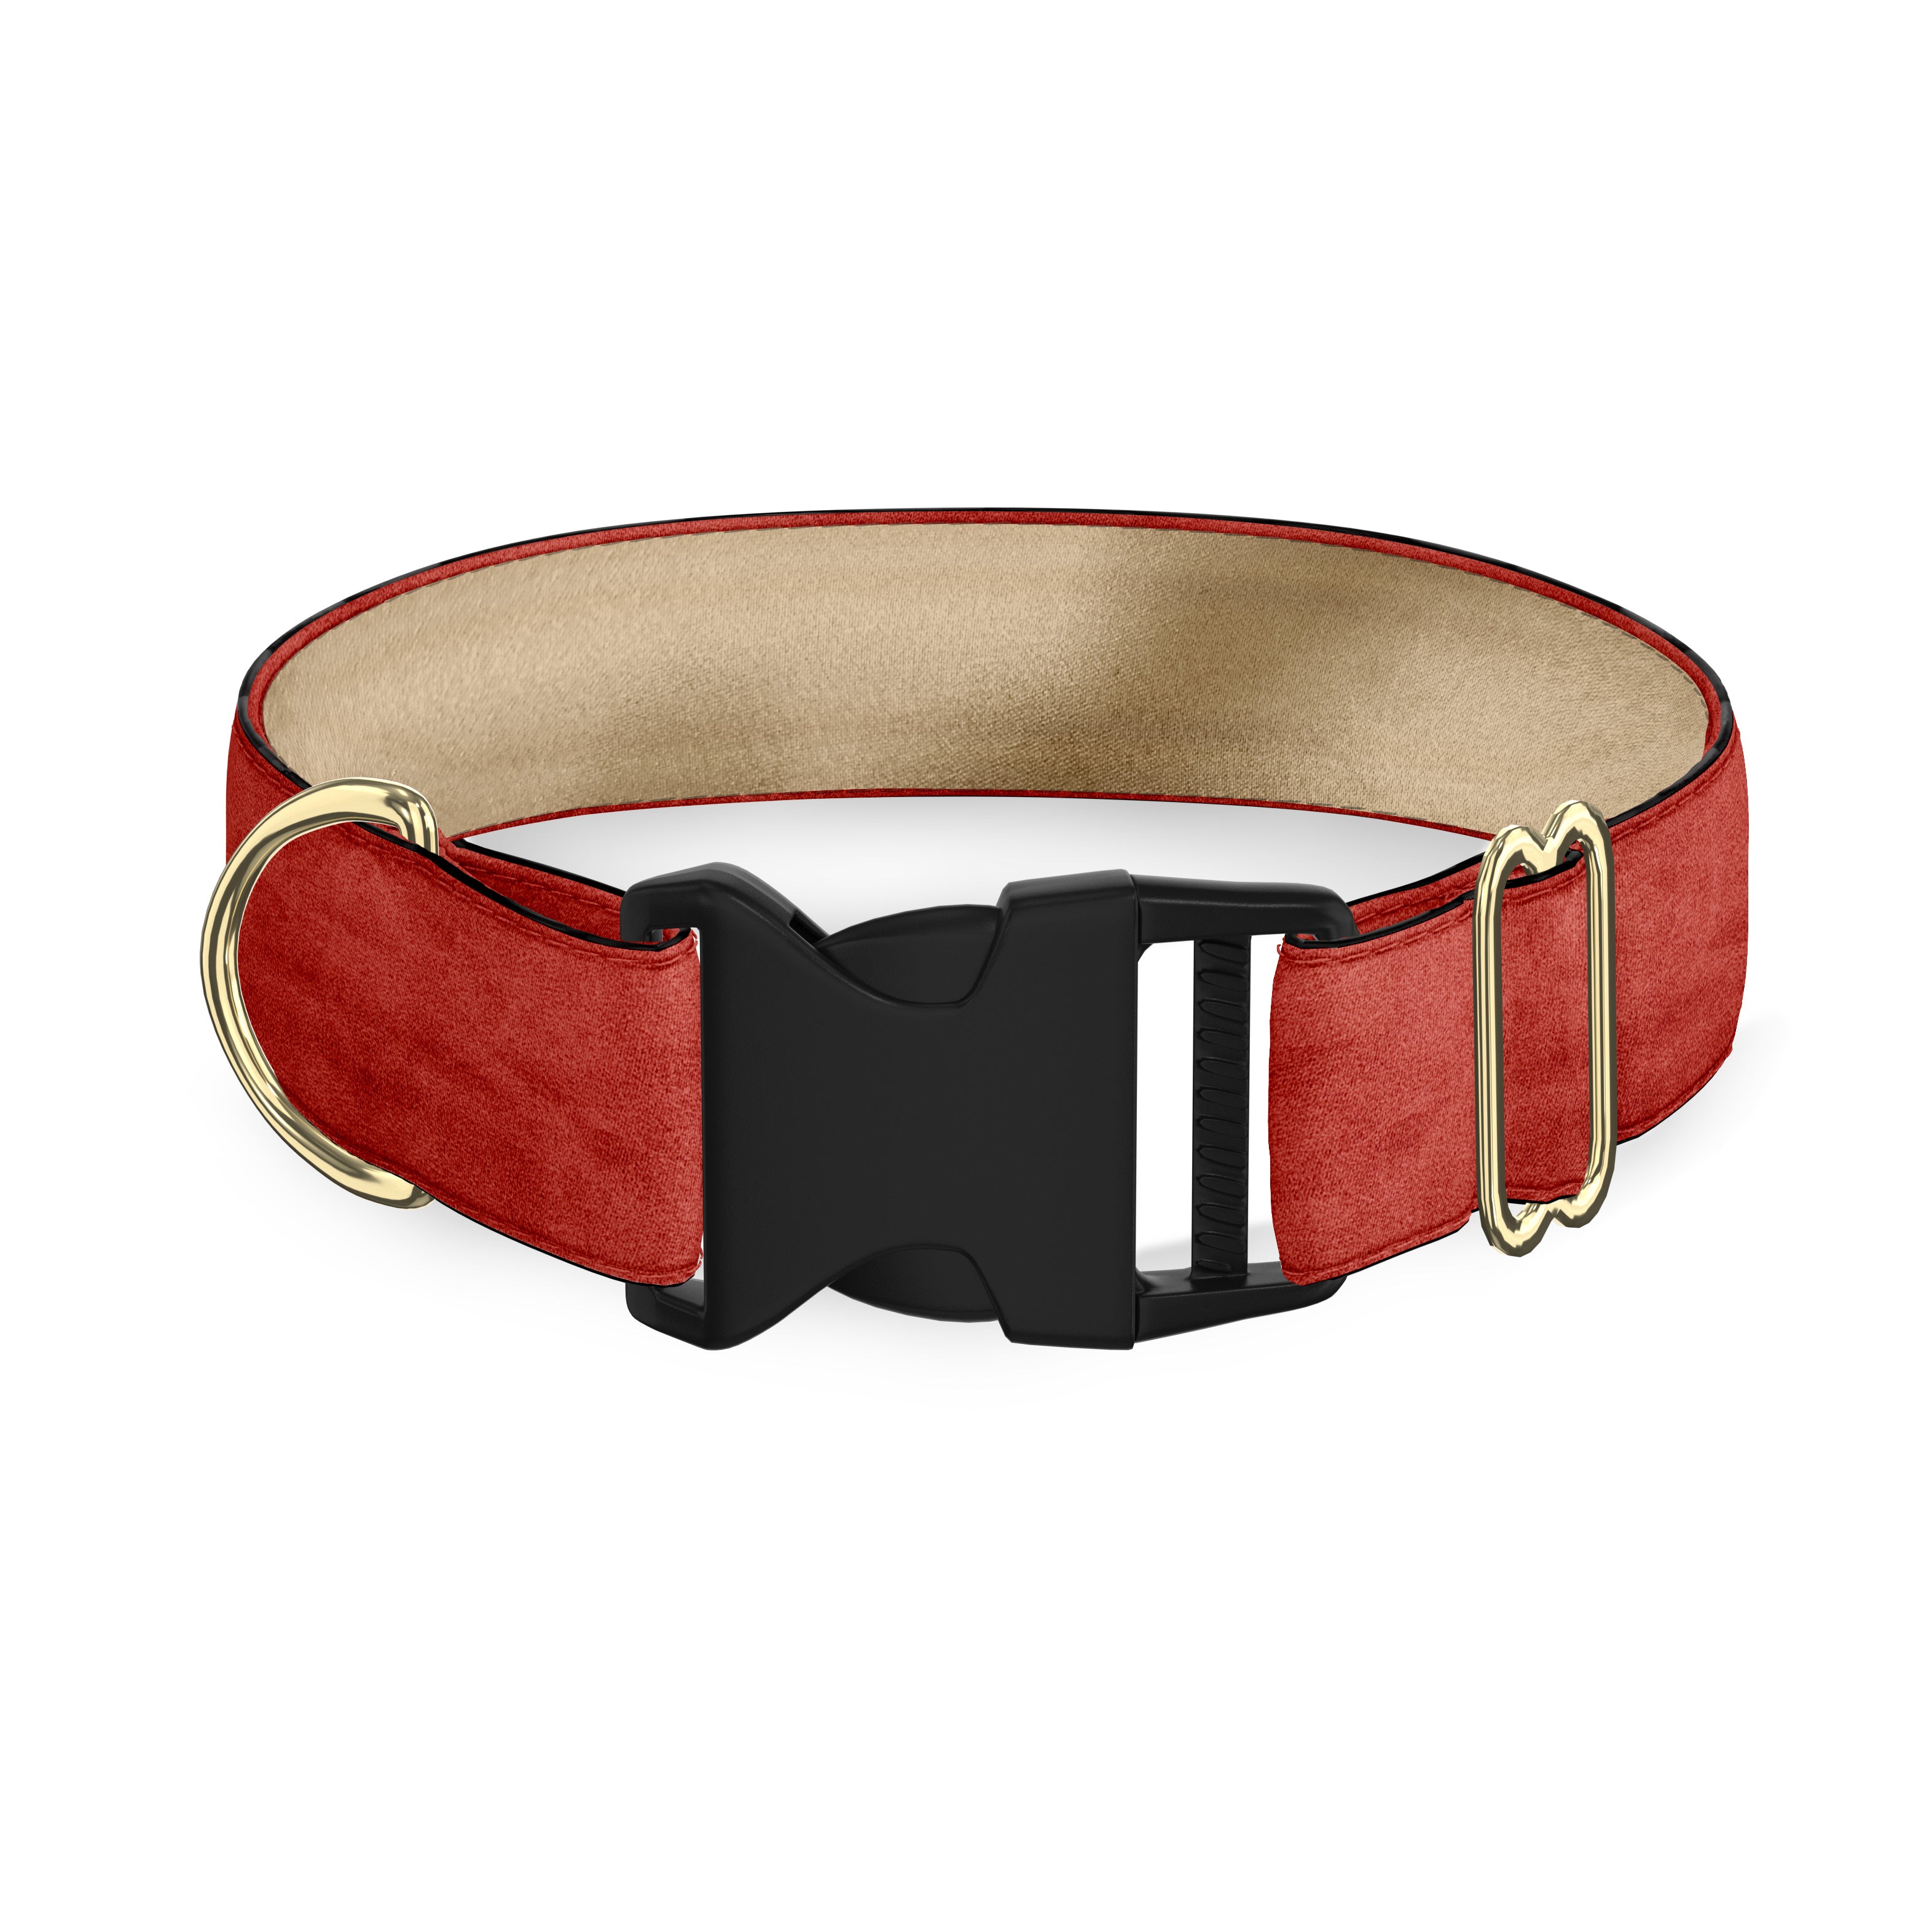 Scarlet Collar - A classic scarlet red dog collar made in Italy